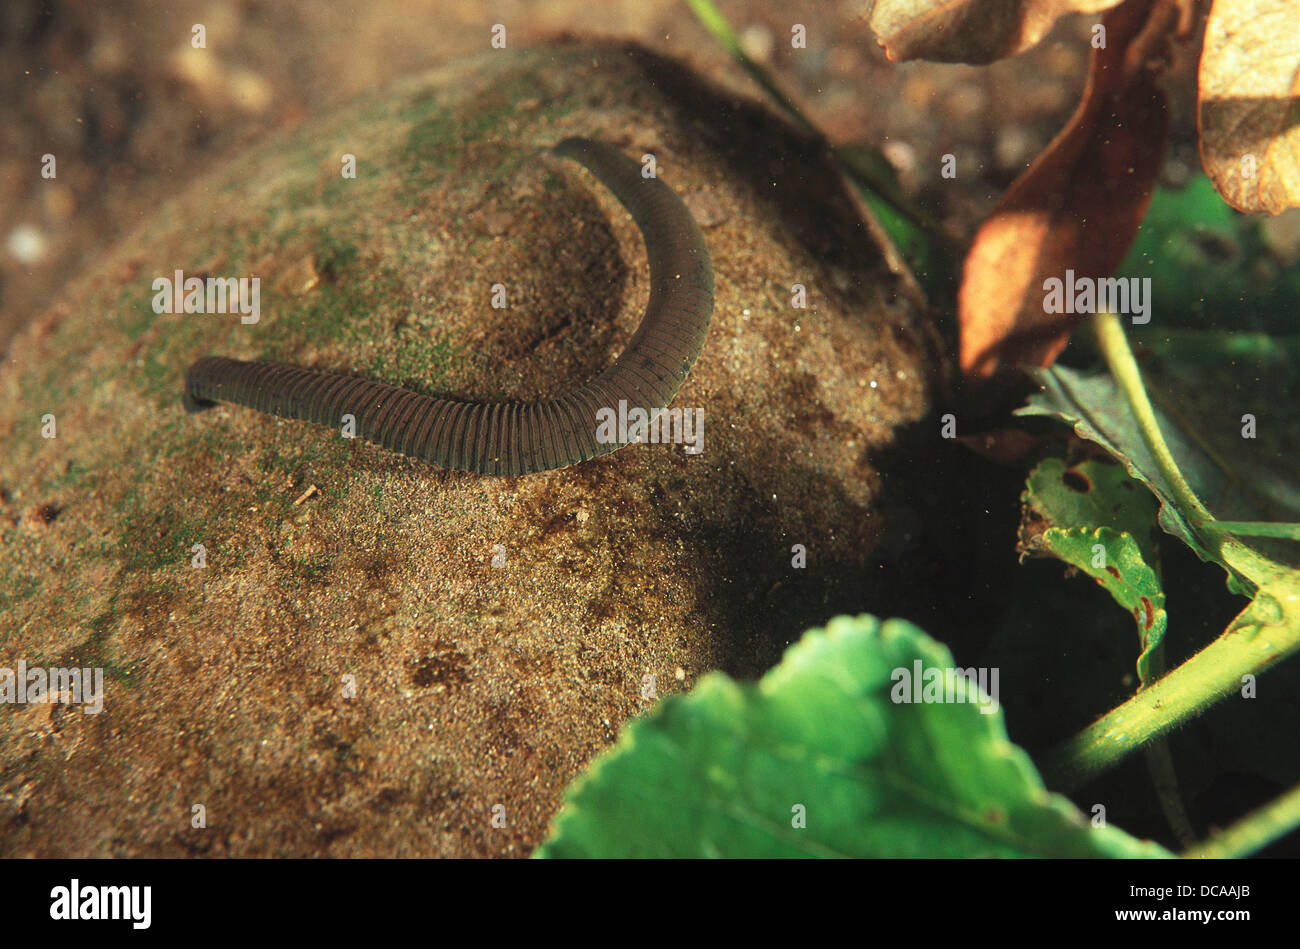 Freshwater. Rivers. Galicia. Spain. Annelid. Bristle worms. Leech